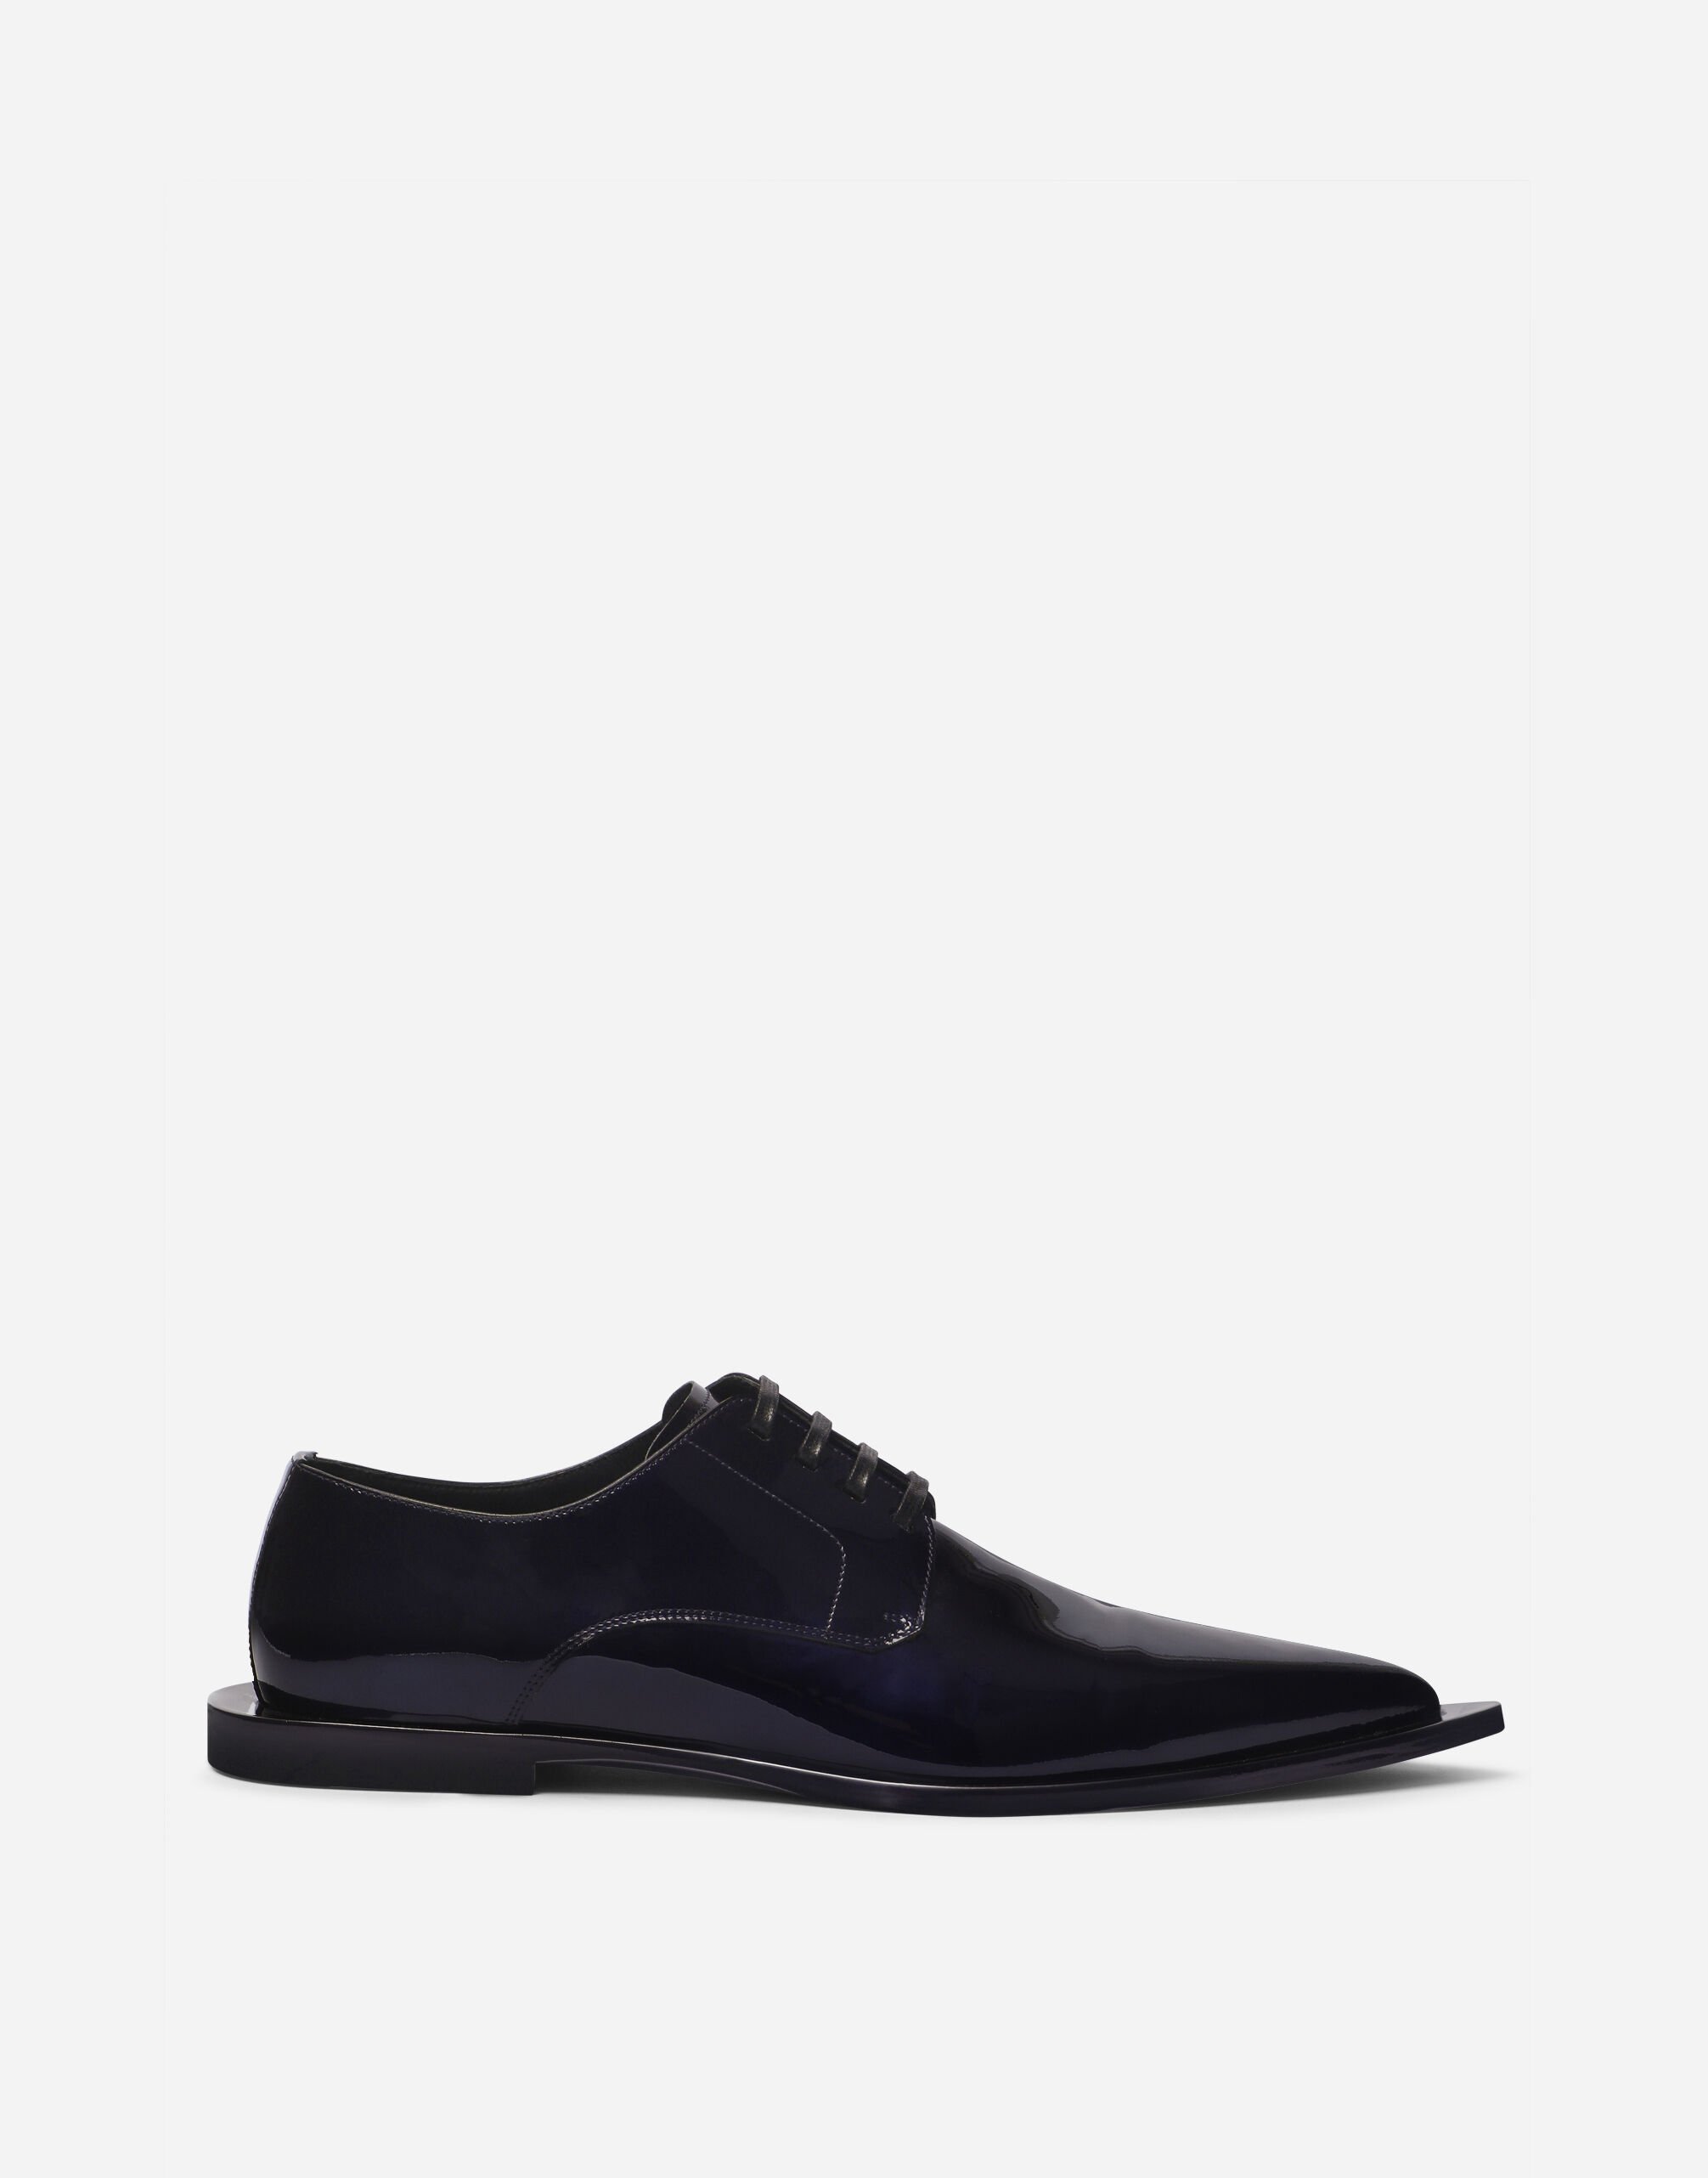 Dolce & Gabbana Metallic patent leather Derby shoes Black A10840A1203